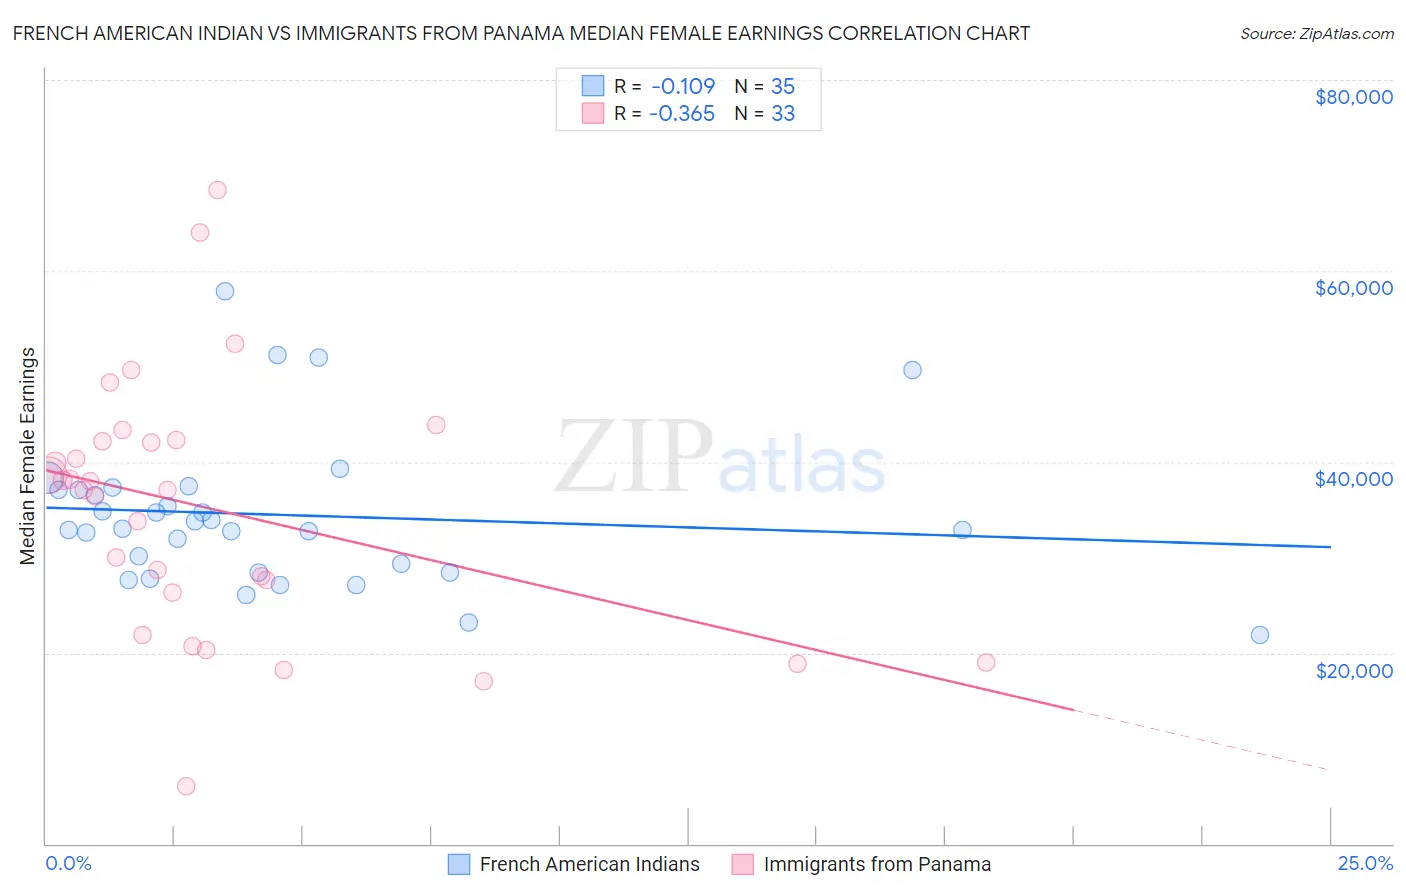 French American Indian vs Immigrants from Panama Median Female Earnings